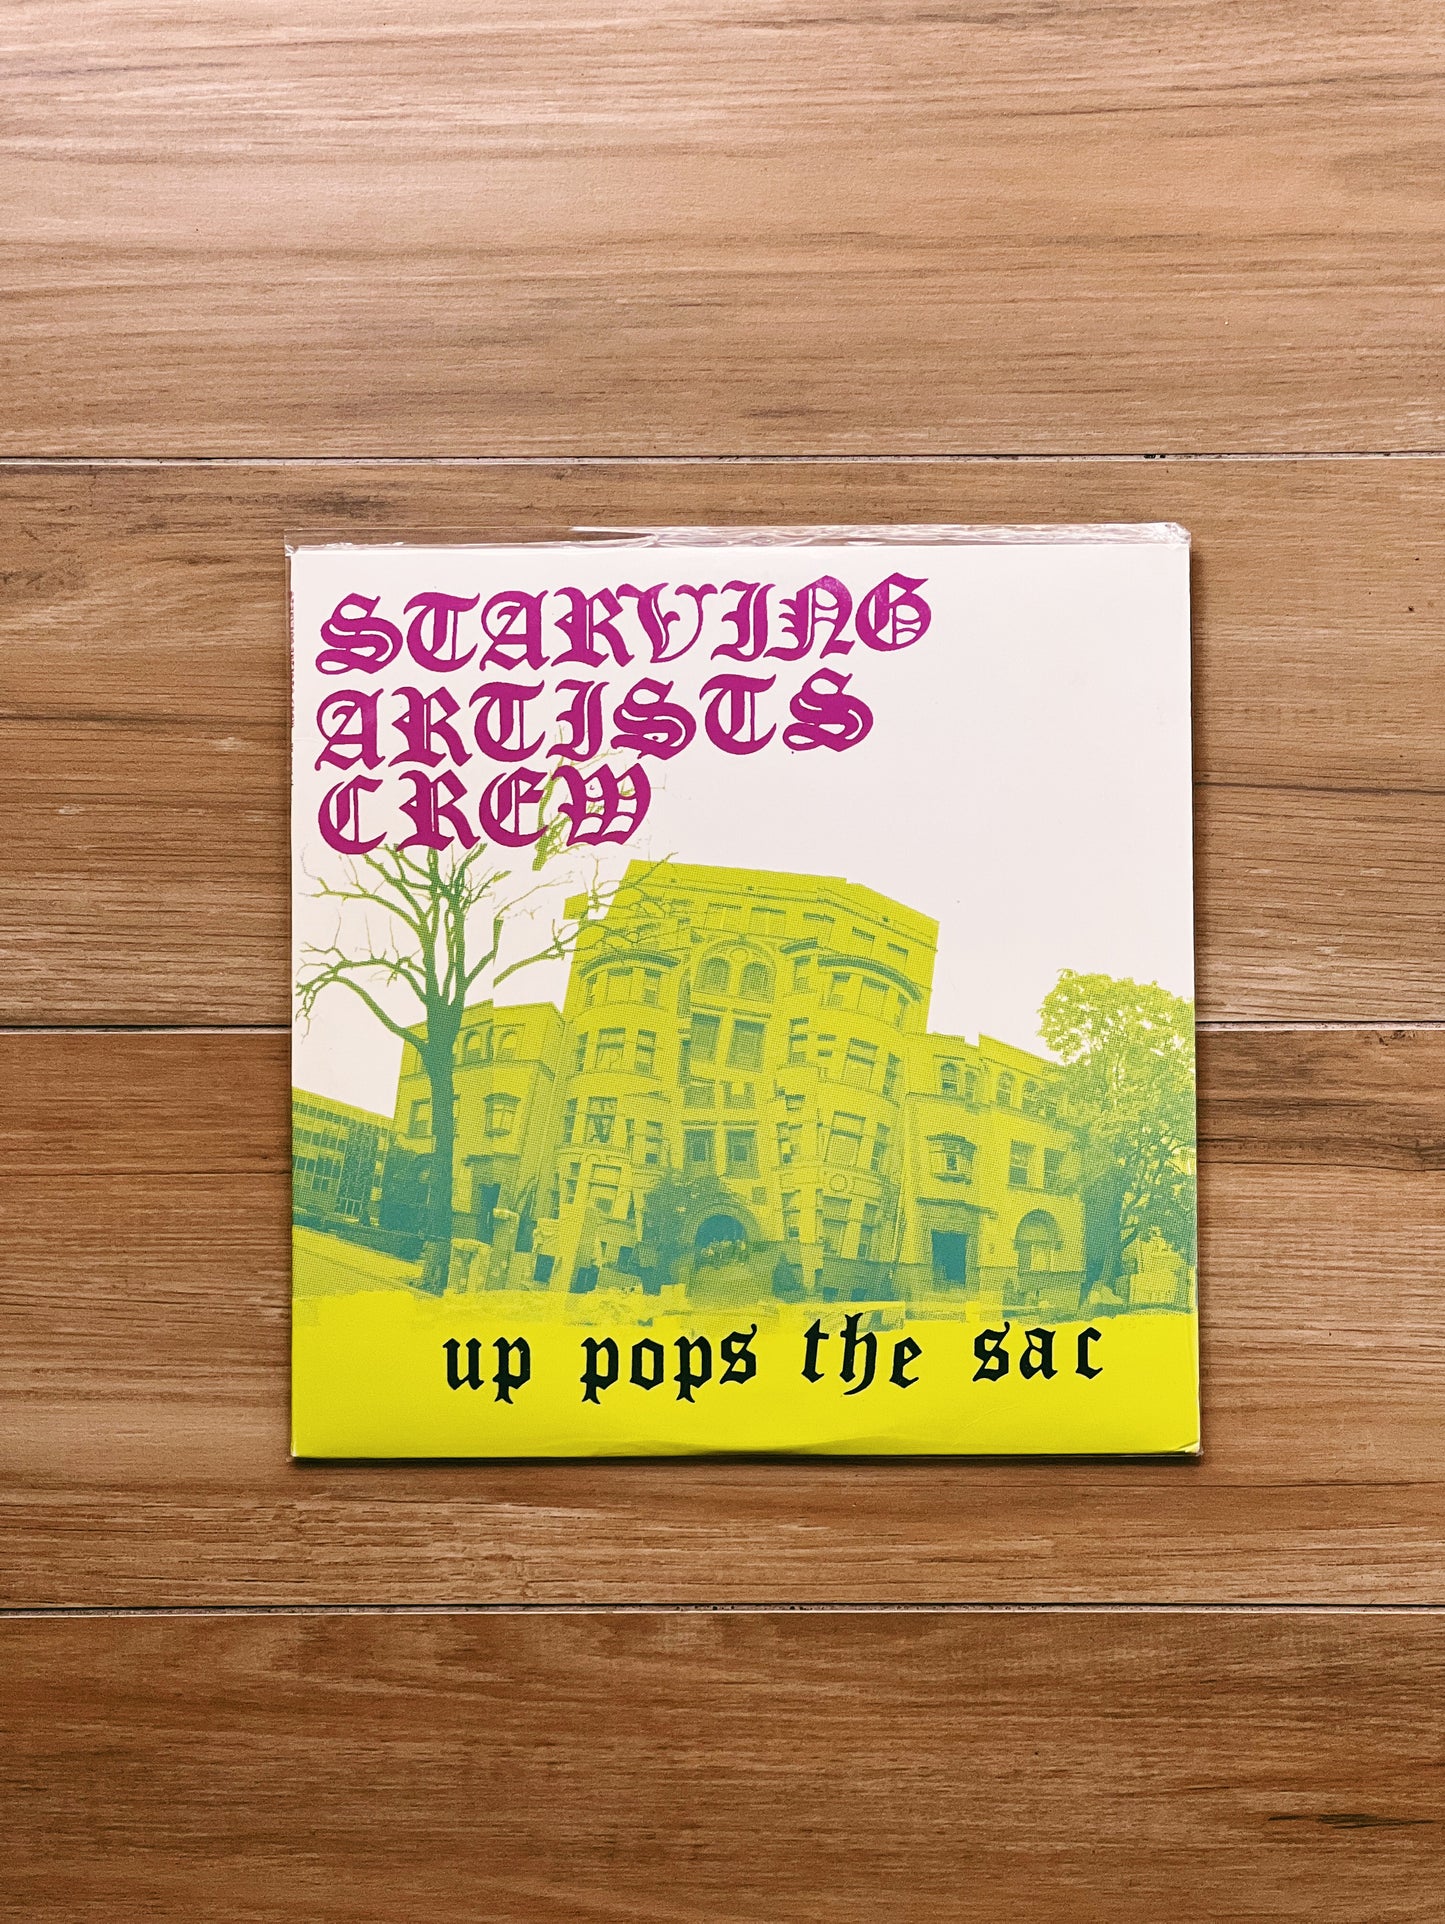 Starving Artists Crew – Up Pops The Sac